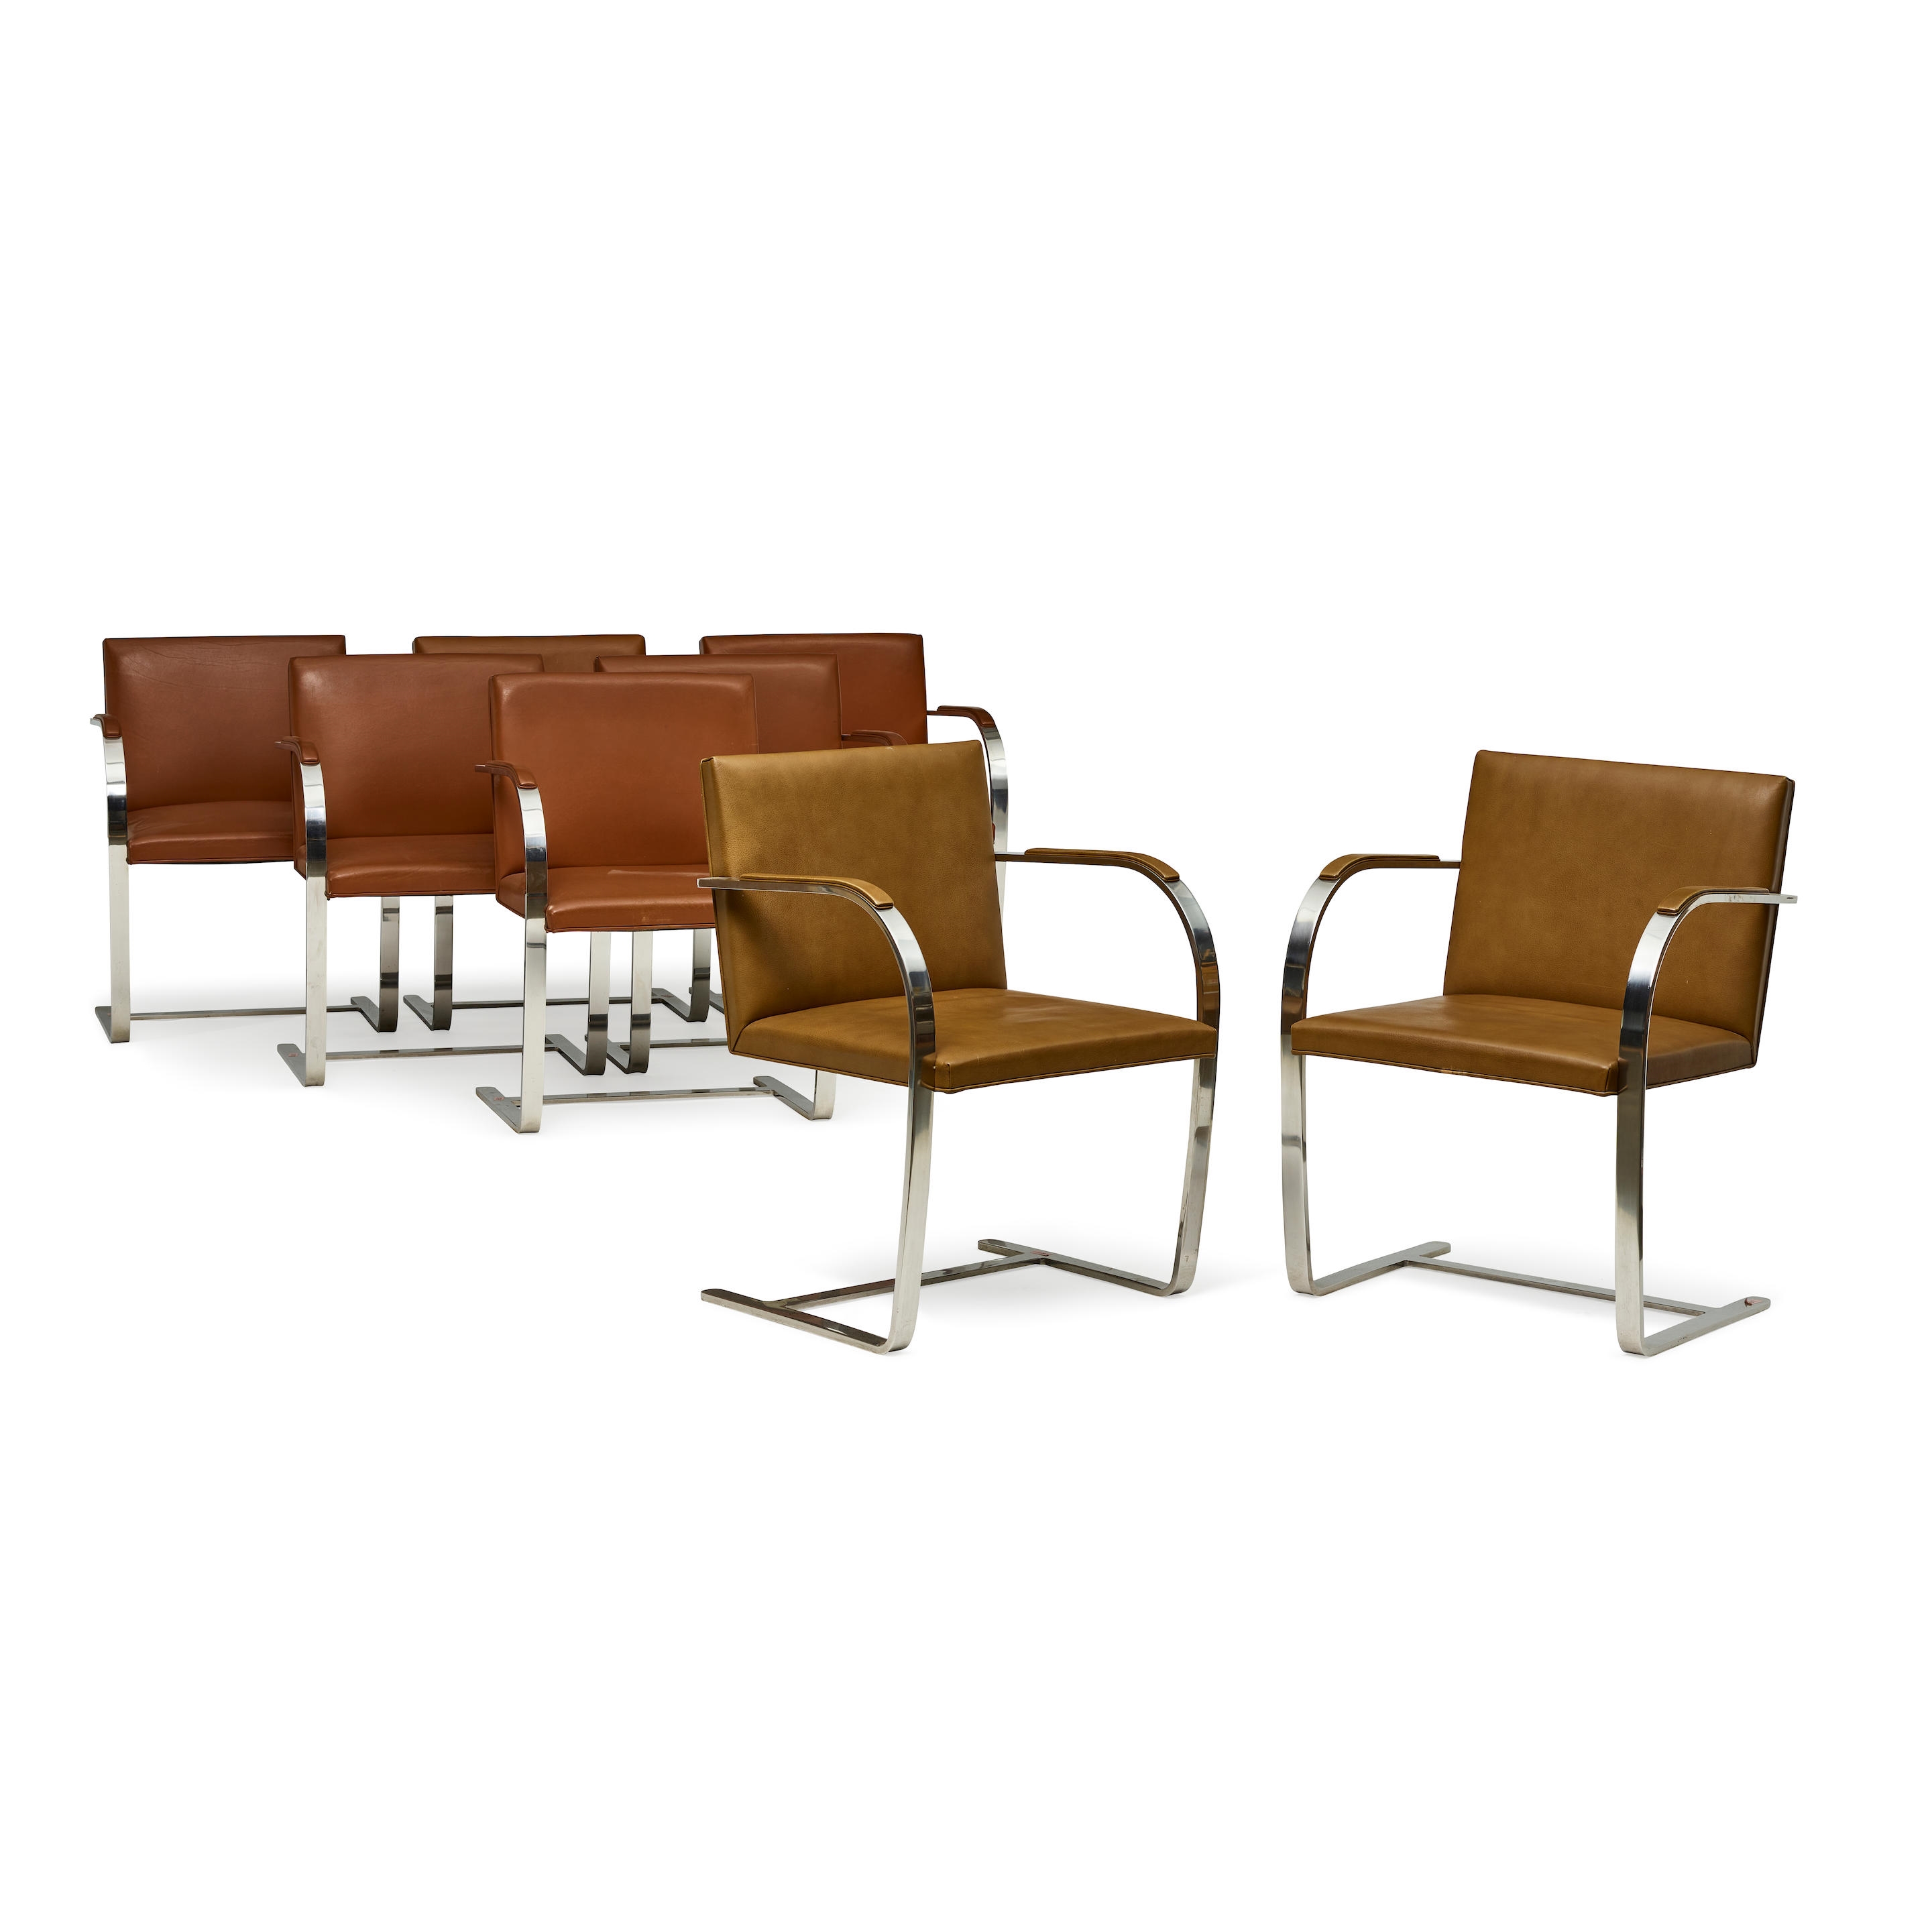 Assembled Group of Eight Brno Chairs